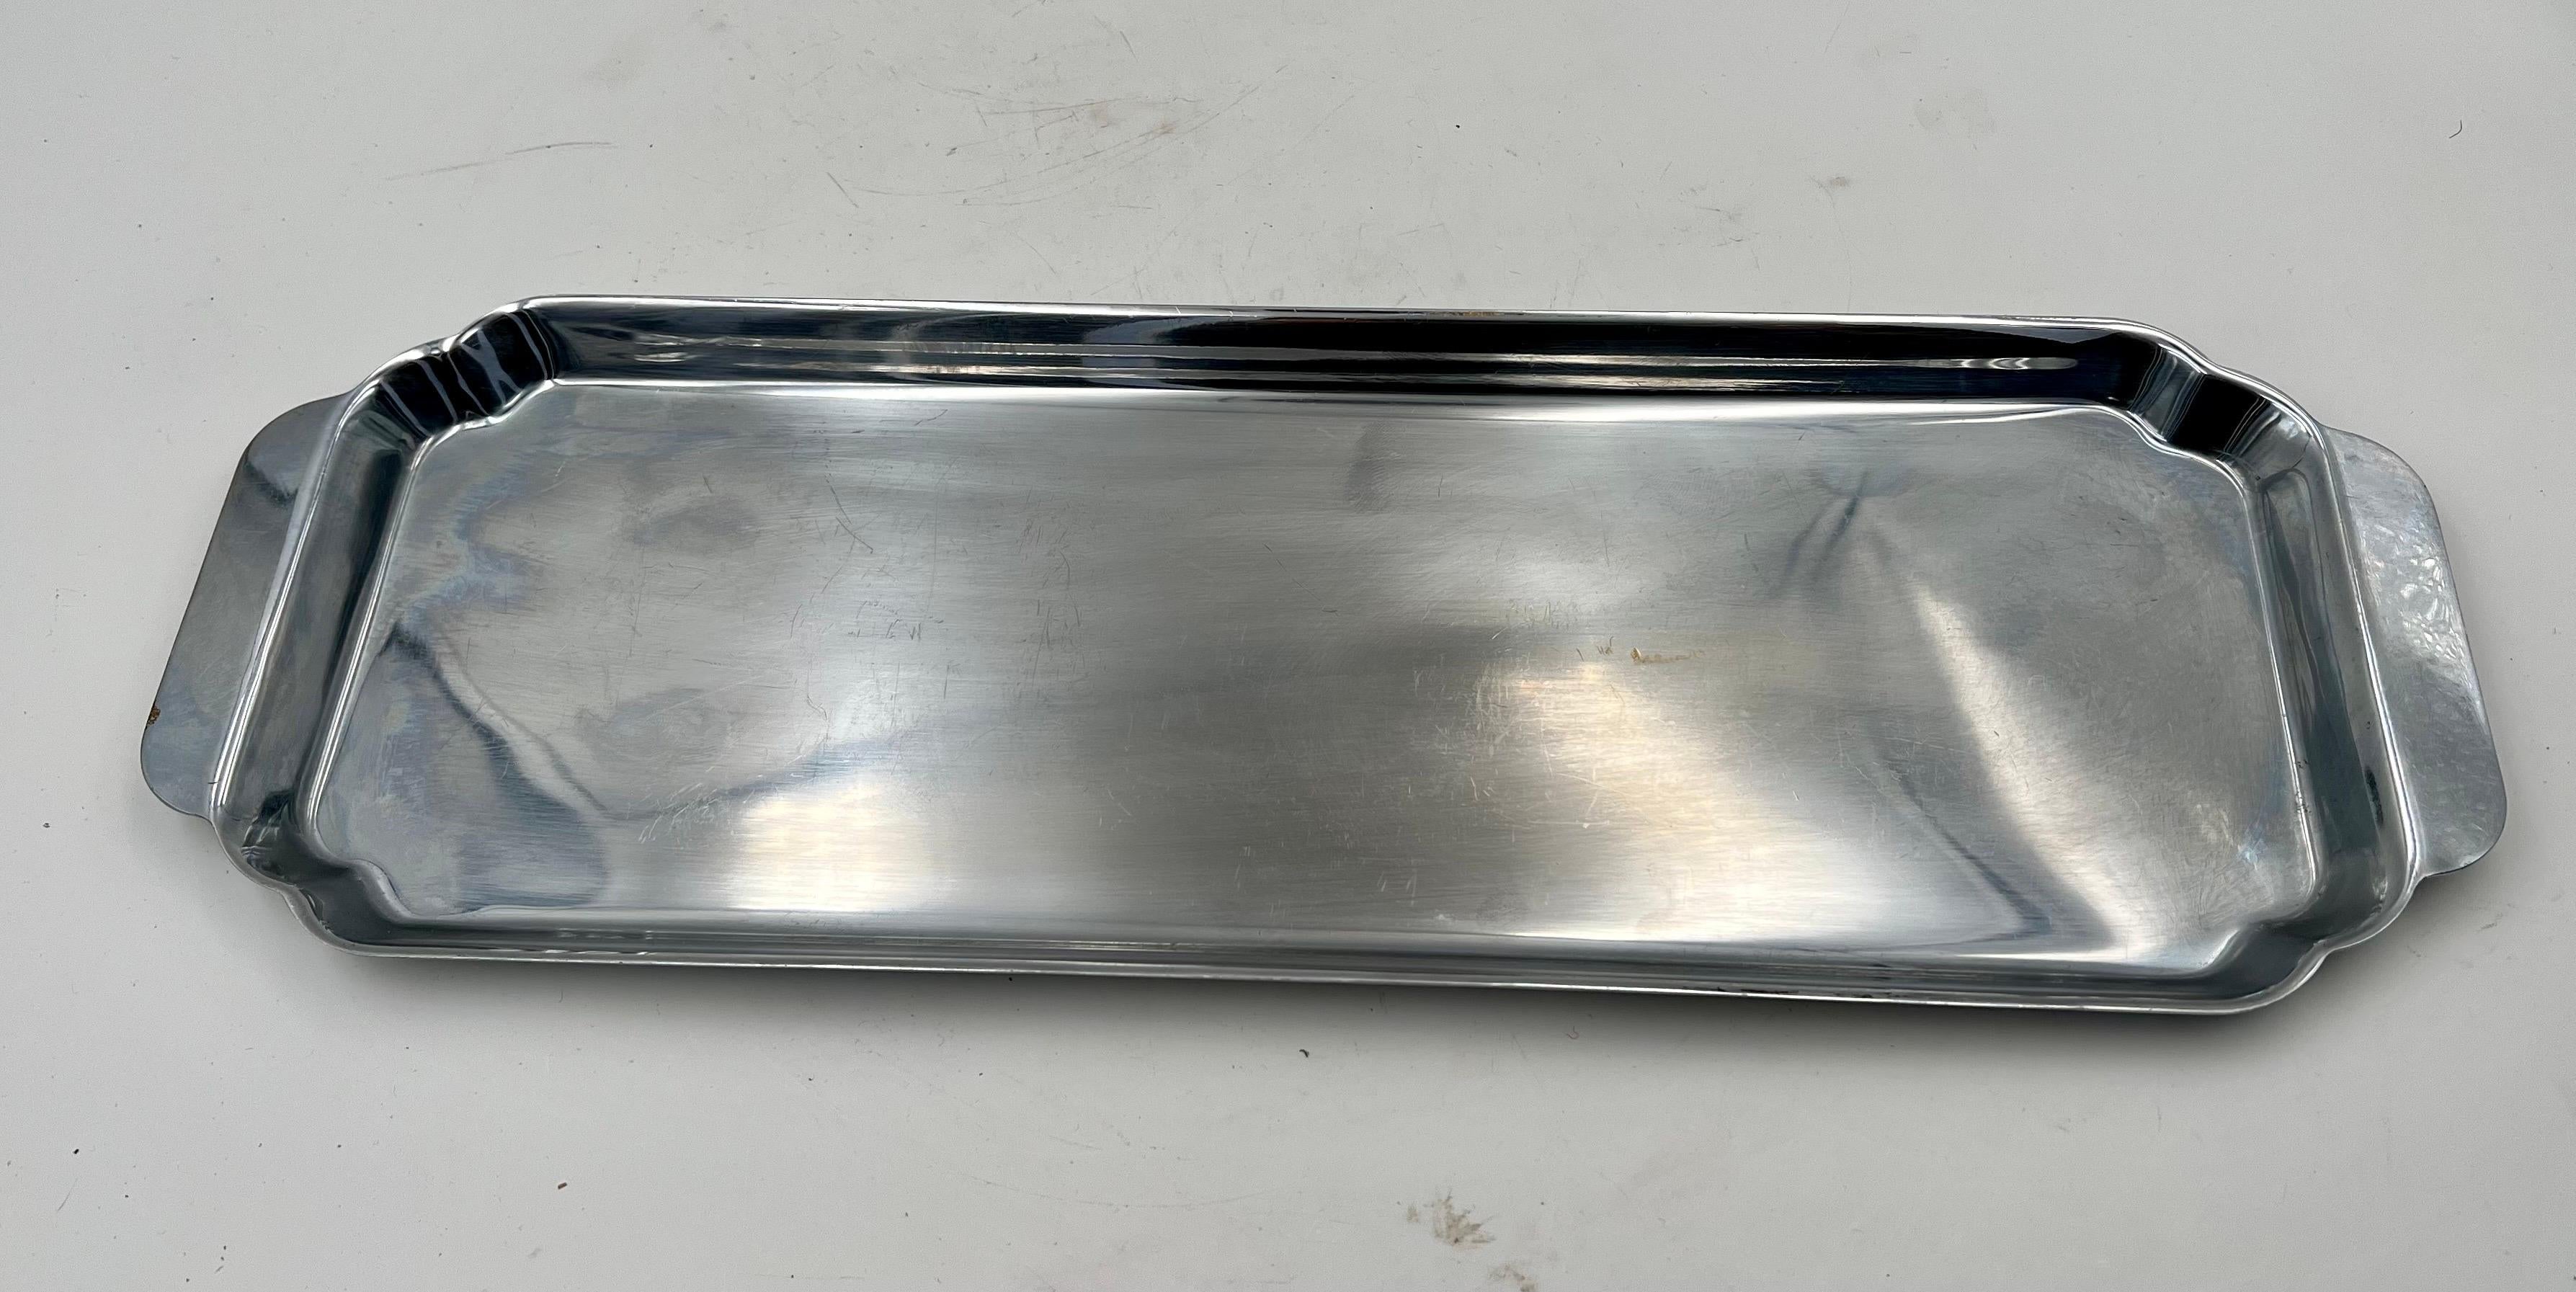 20th Century American Art Deco Rare Chrome Plated Serving Tray by Chase